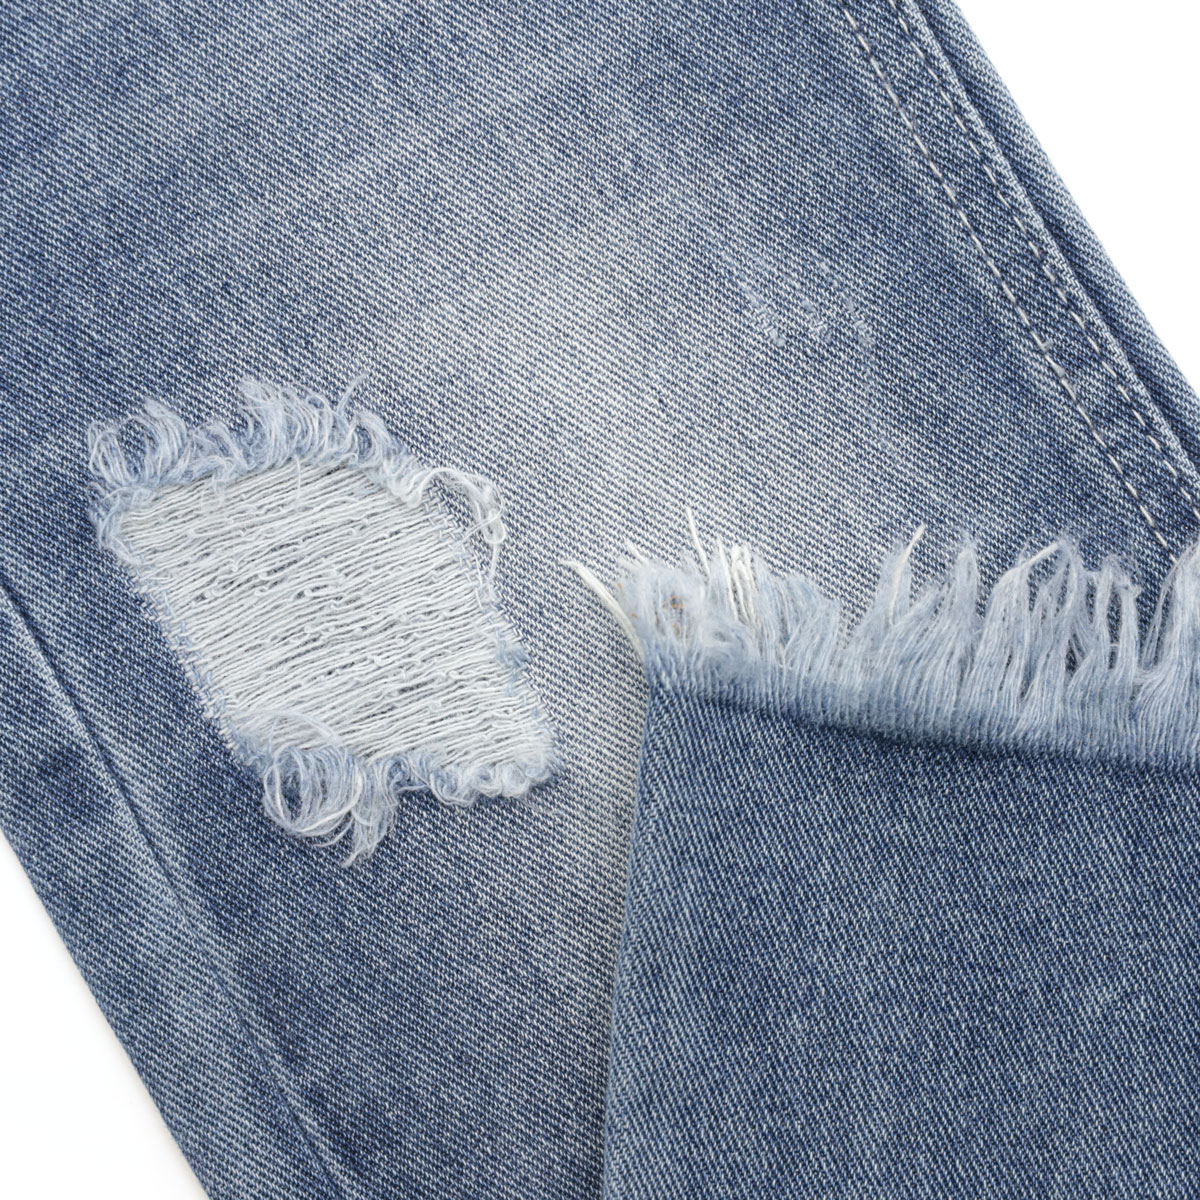 Is There Any Way to Remove Dried Oil-based House Paint From Denim Jeans? 1